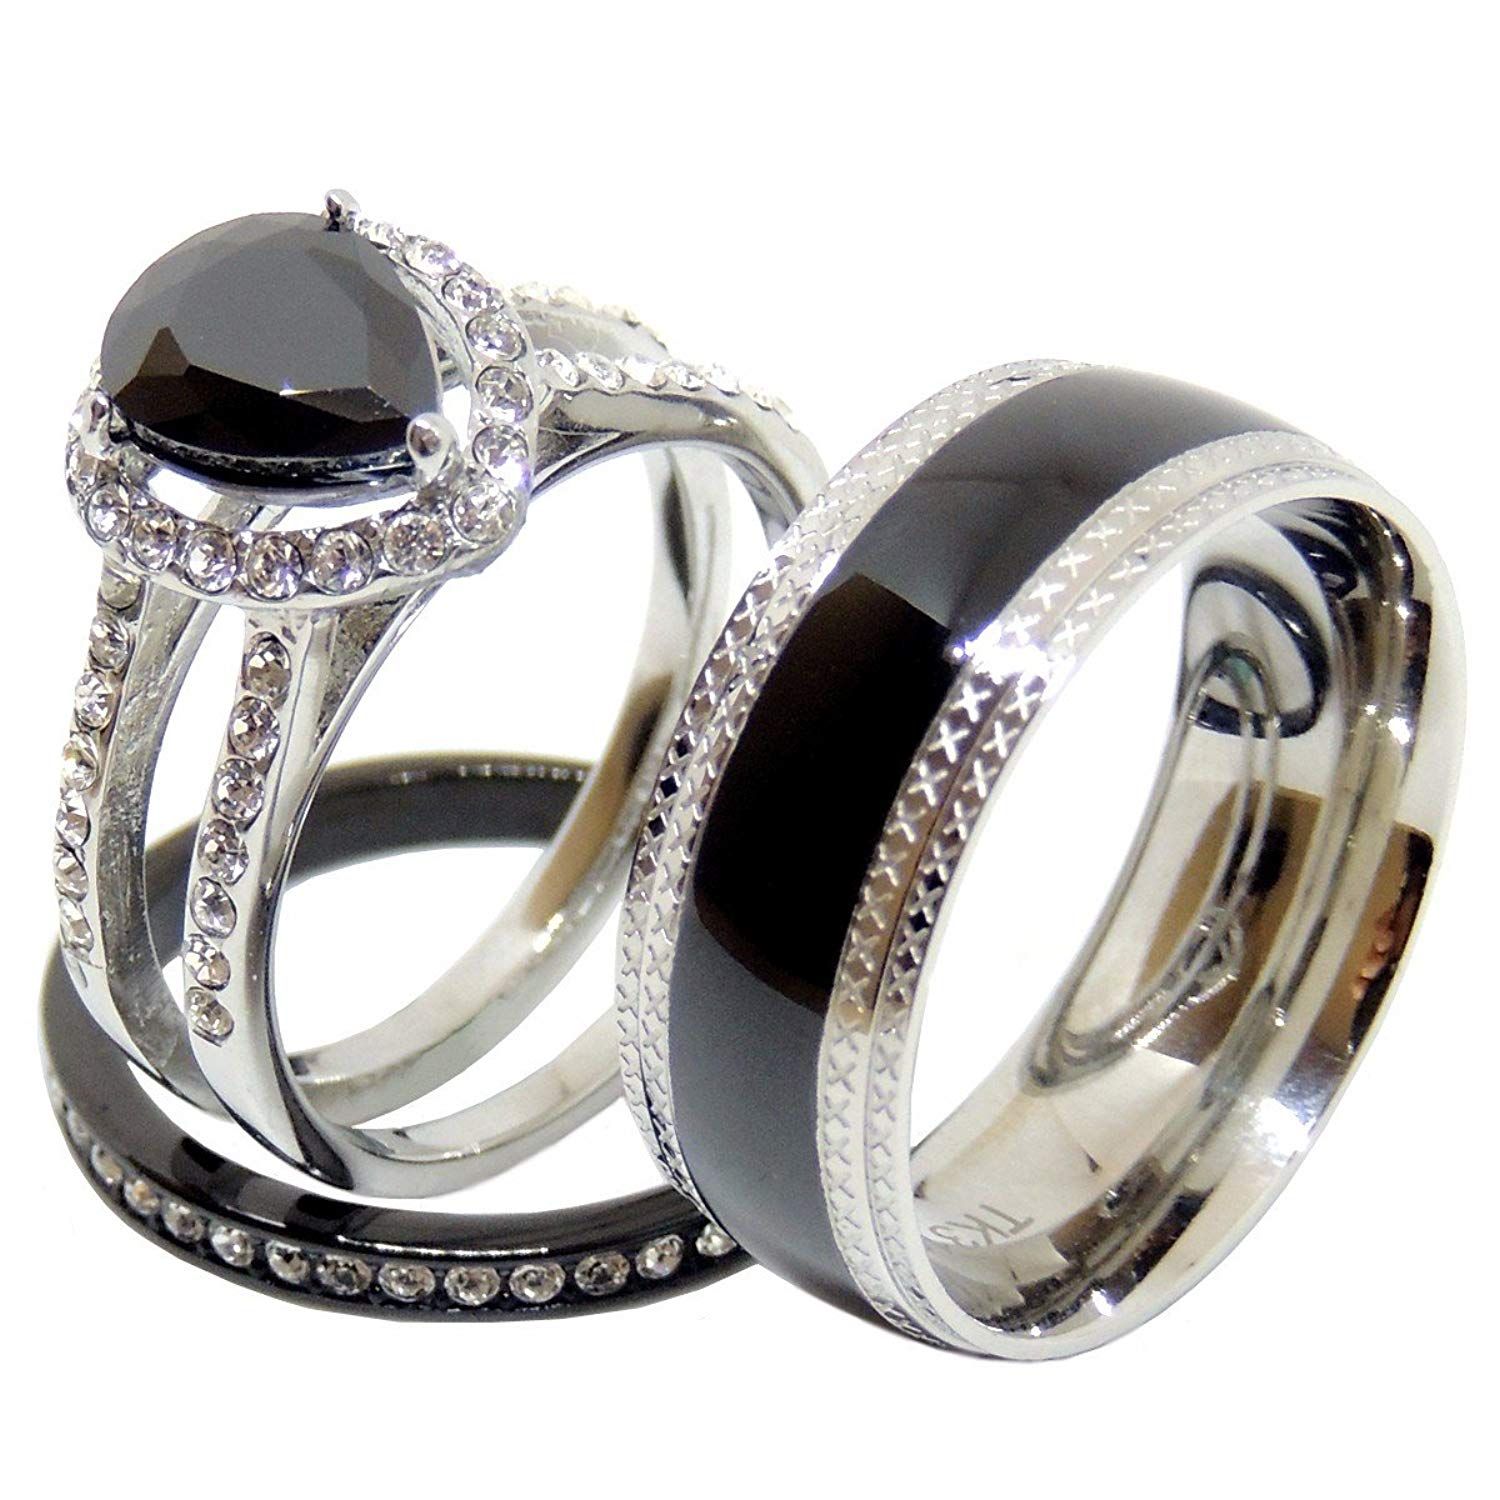 Lanyjewelry His Hers Couples Ring Set Womens Round CZ Stainless Steel ...